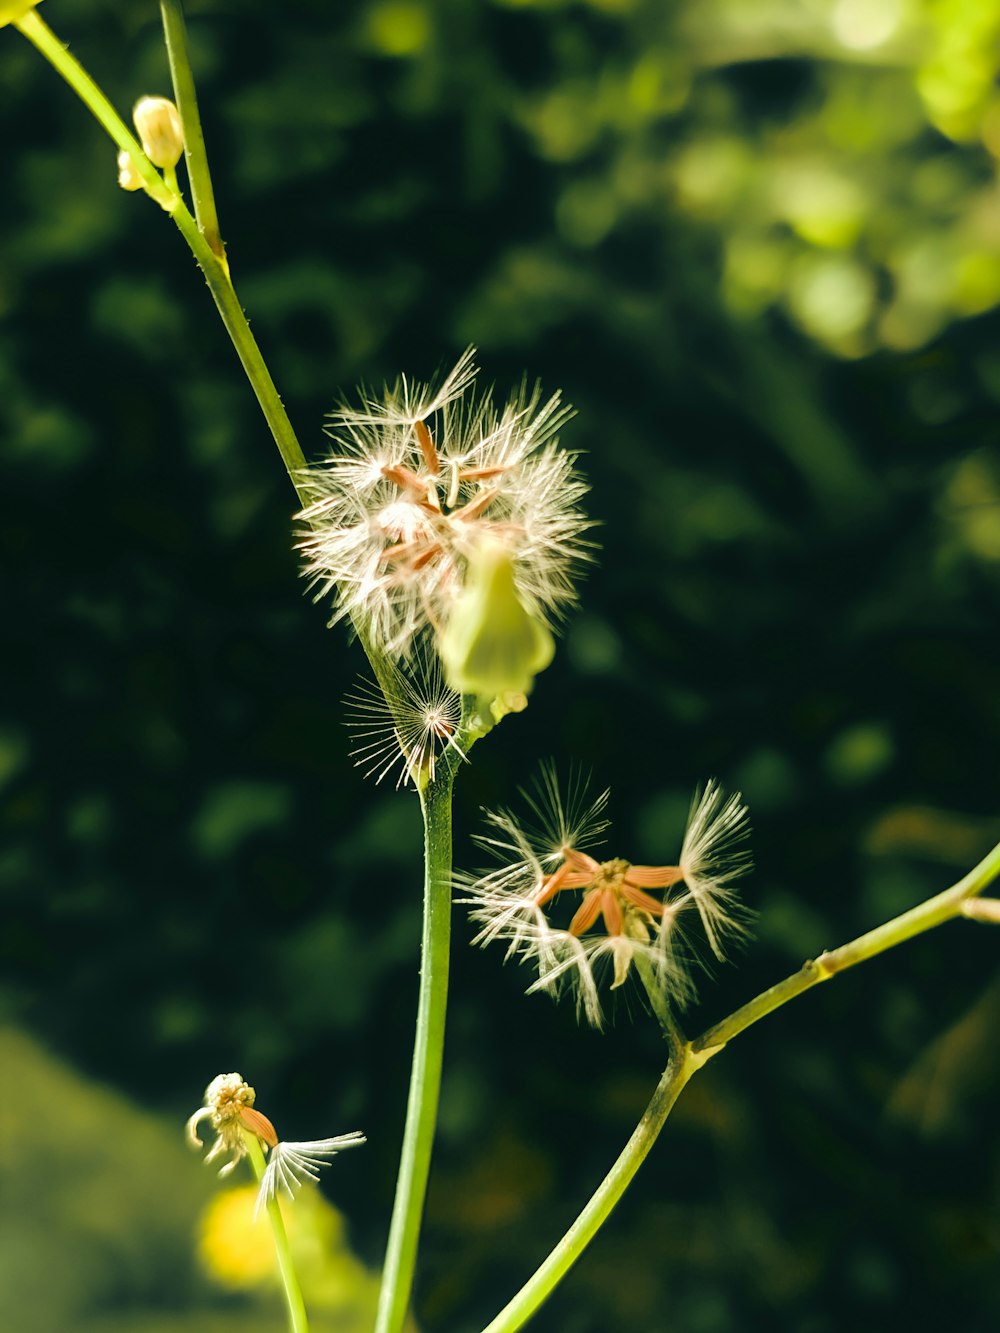 a close up of a dandelion plant with a blurry background